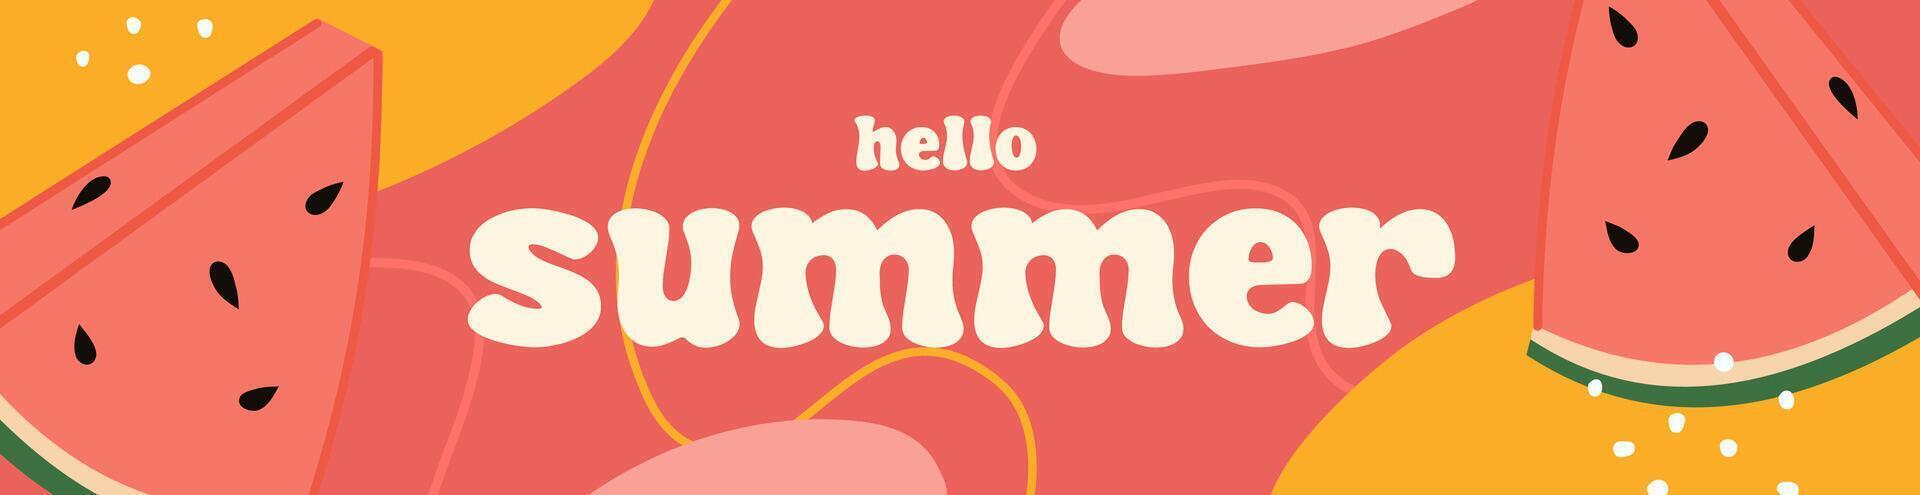 Hello summer colorful banner design. Horizontal summer poster with watermelon. Modern abstract design with fruits. vector